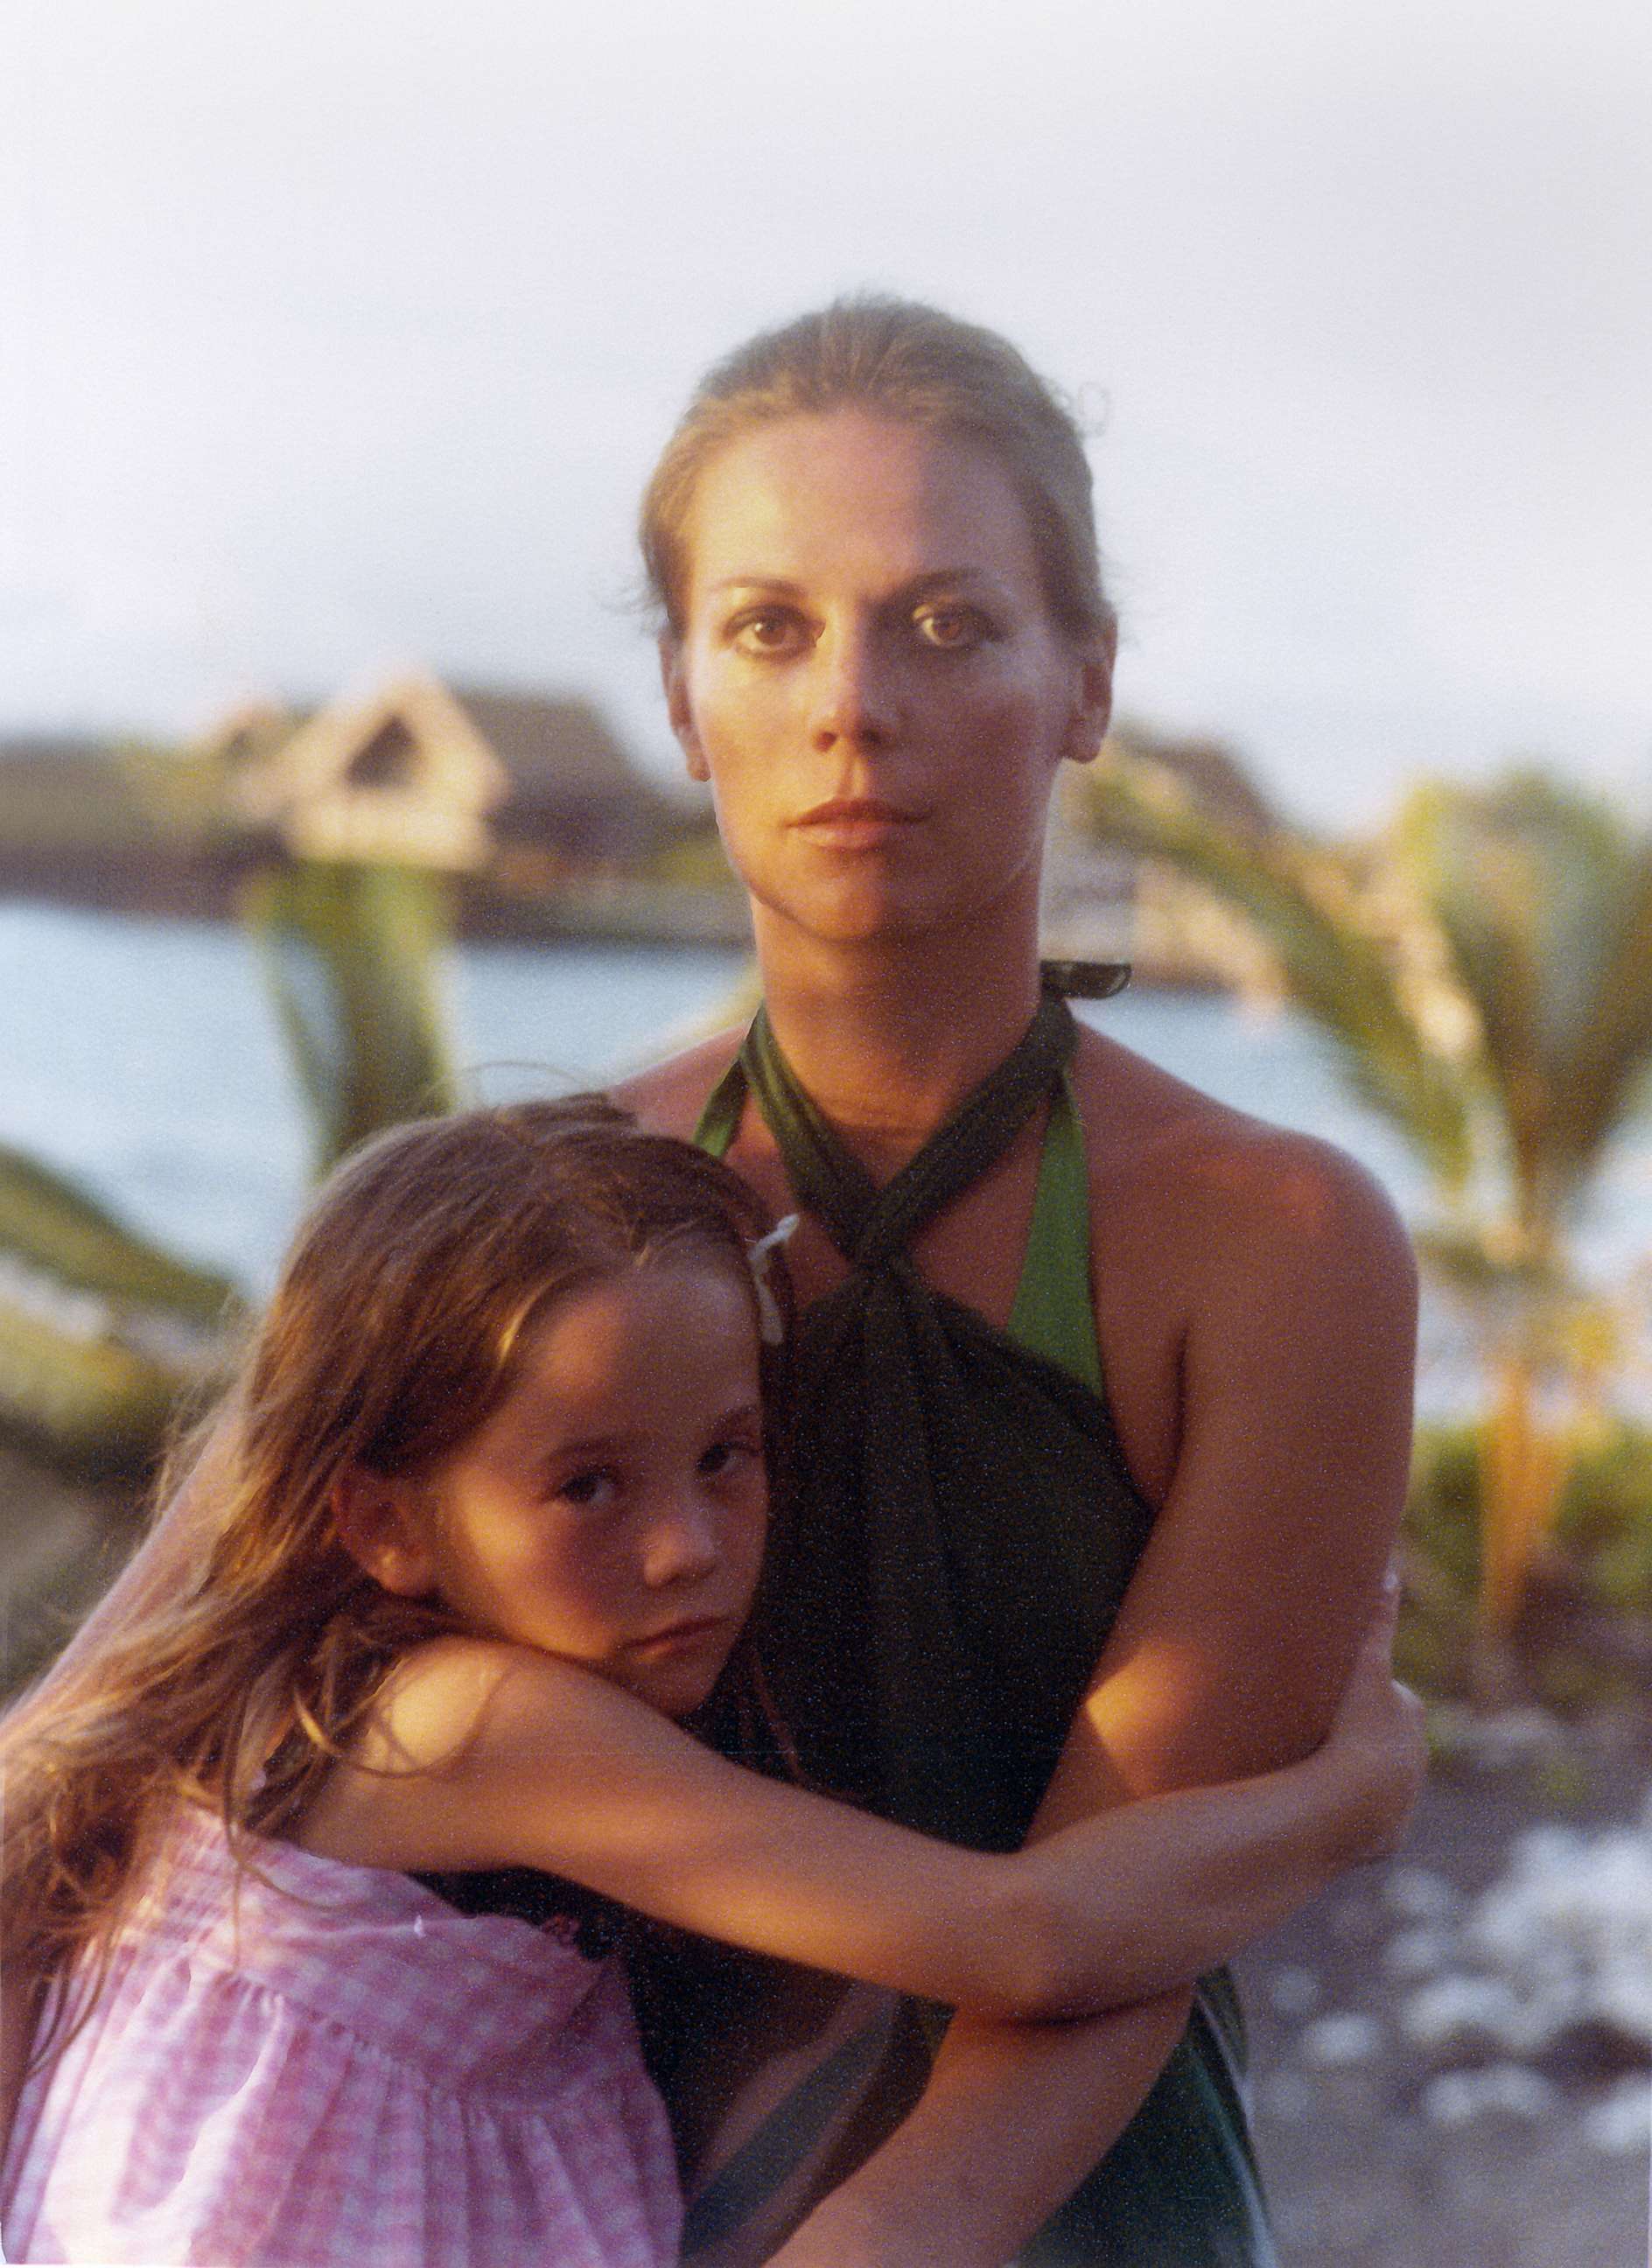 PHOTO: Natalie Wood with her daughter, Natasha Gregson Wagner, in Hawaii, in 1978.